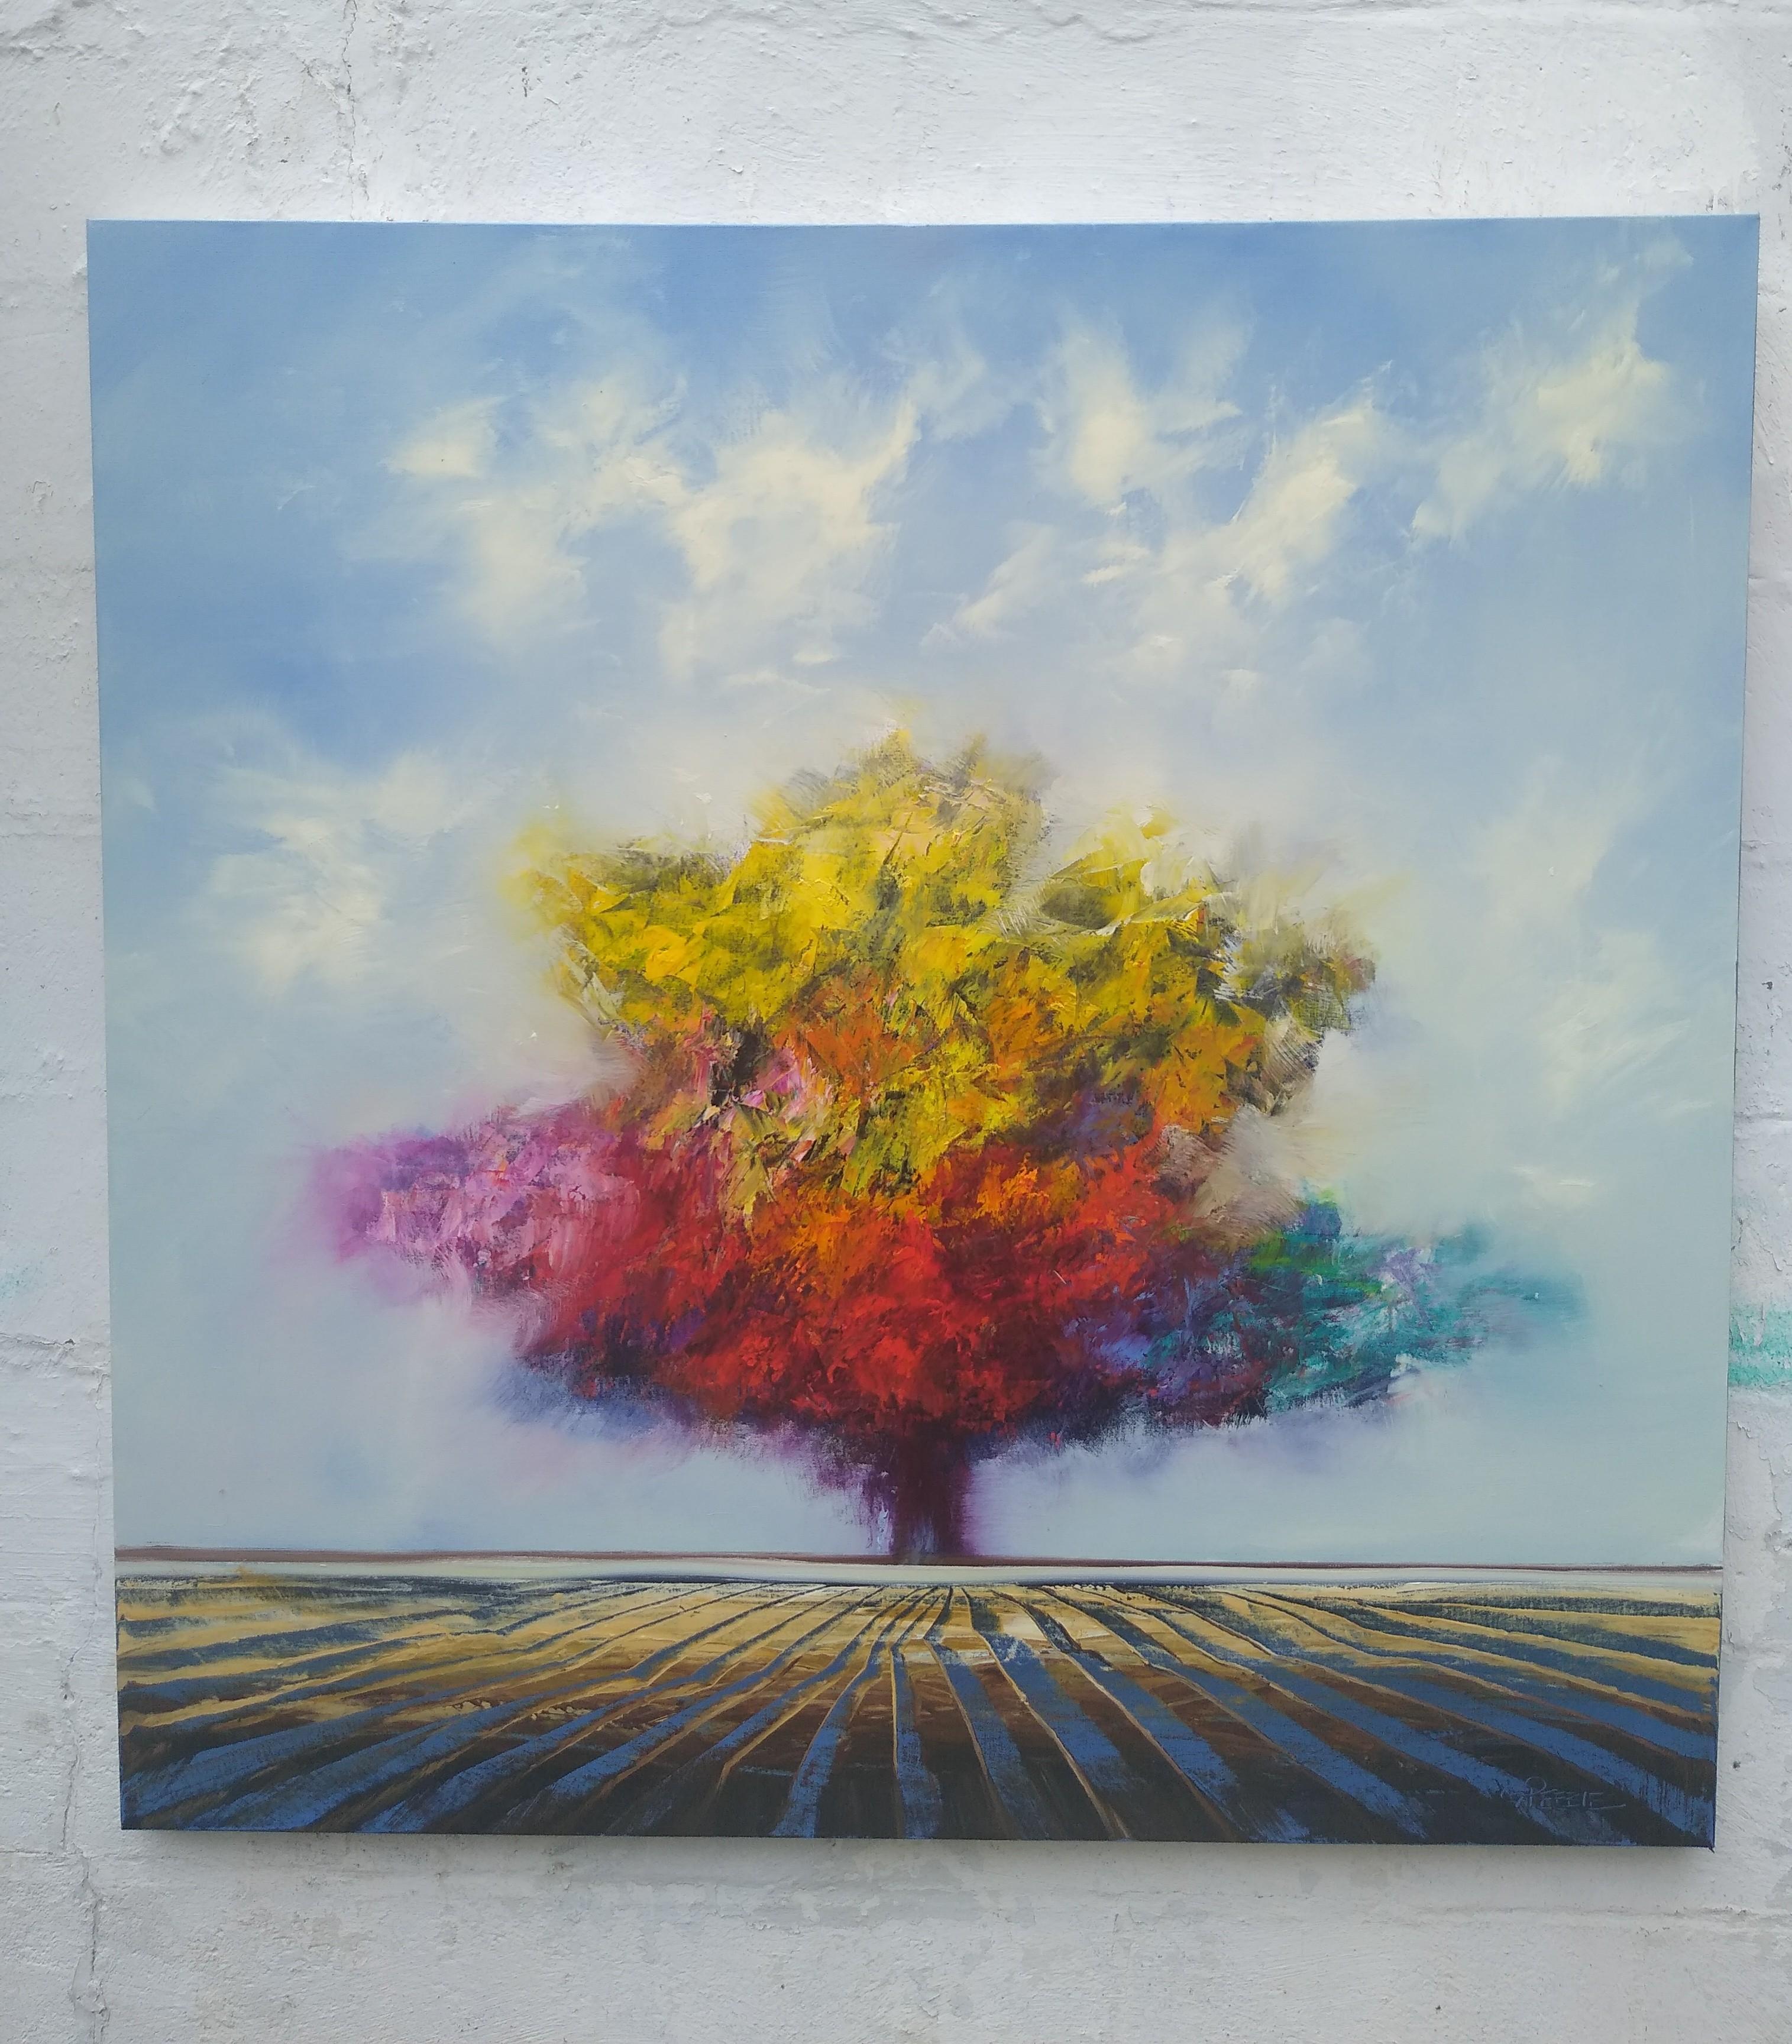 <p>Artist Comments<br>In his signature style, artist George Peebles depicts a colorful gigantic tree in the middle of a vast landscape. He portrays the temperate dressing of autumn in the tree's multi-hued feathery leaves. Clouds dreamily sail on